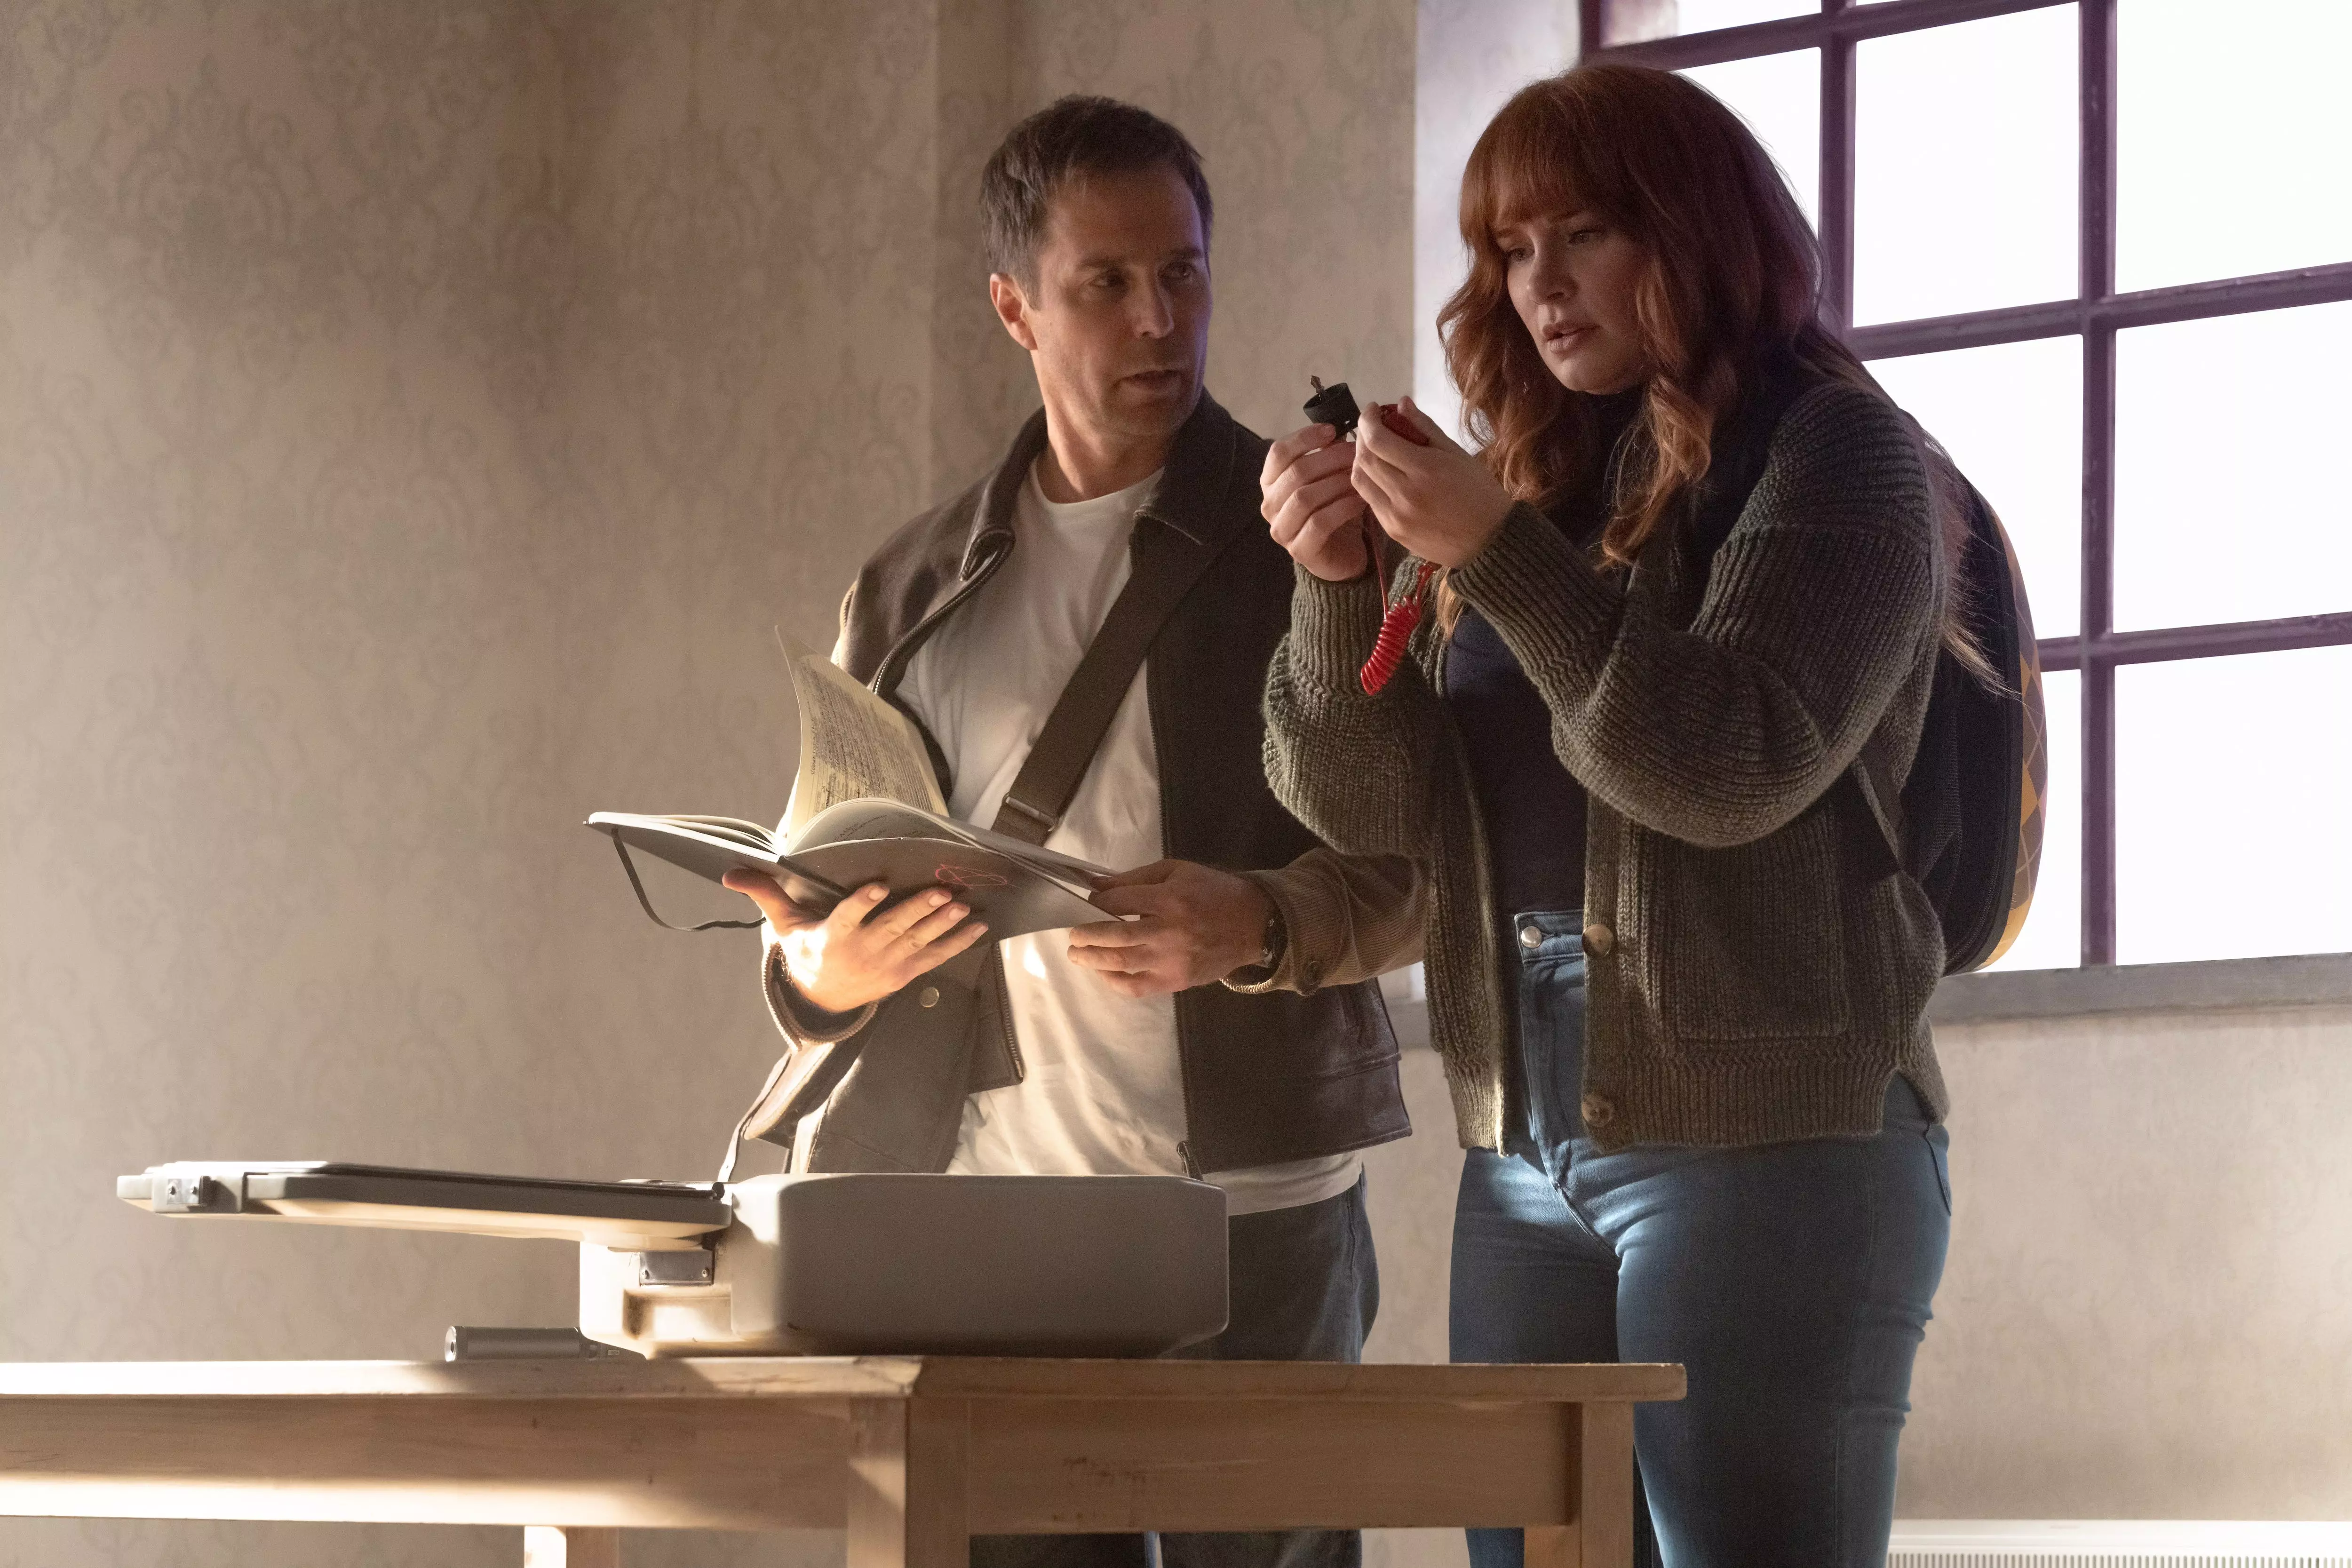 Aidan (Sam Rockwell) works to keep spy novelist Elly Conway (Bryce Dallas Howard) safe from the shadowy Division in "Argylle."